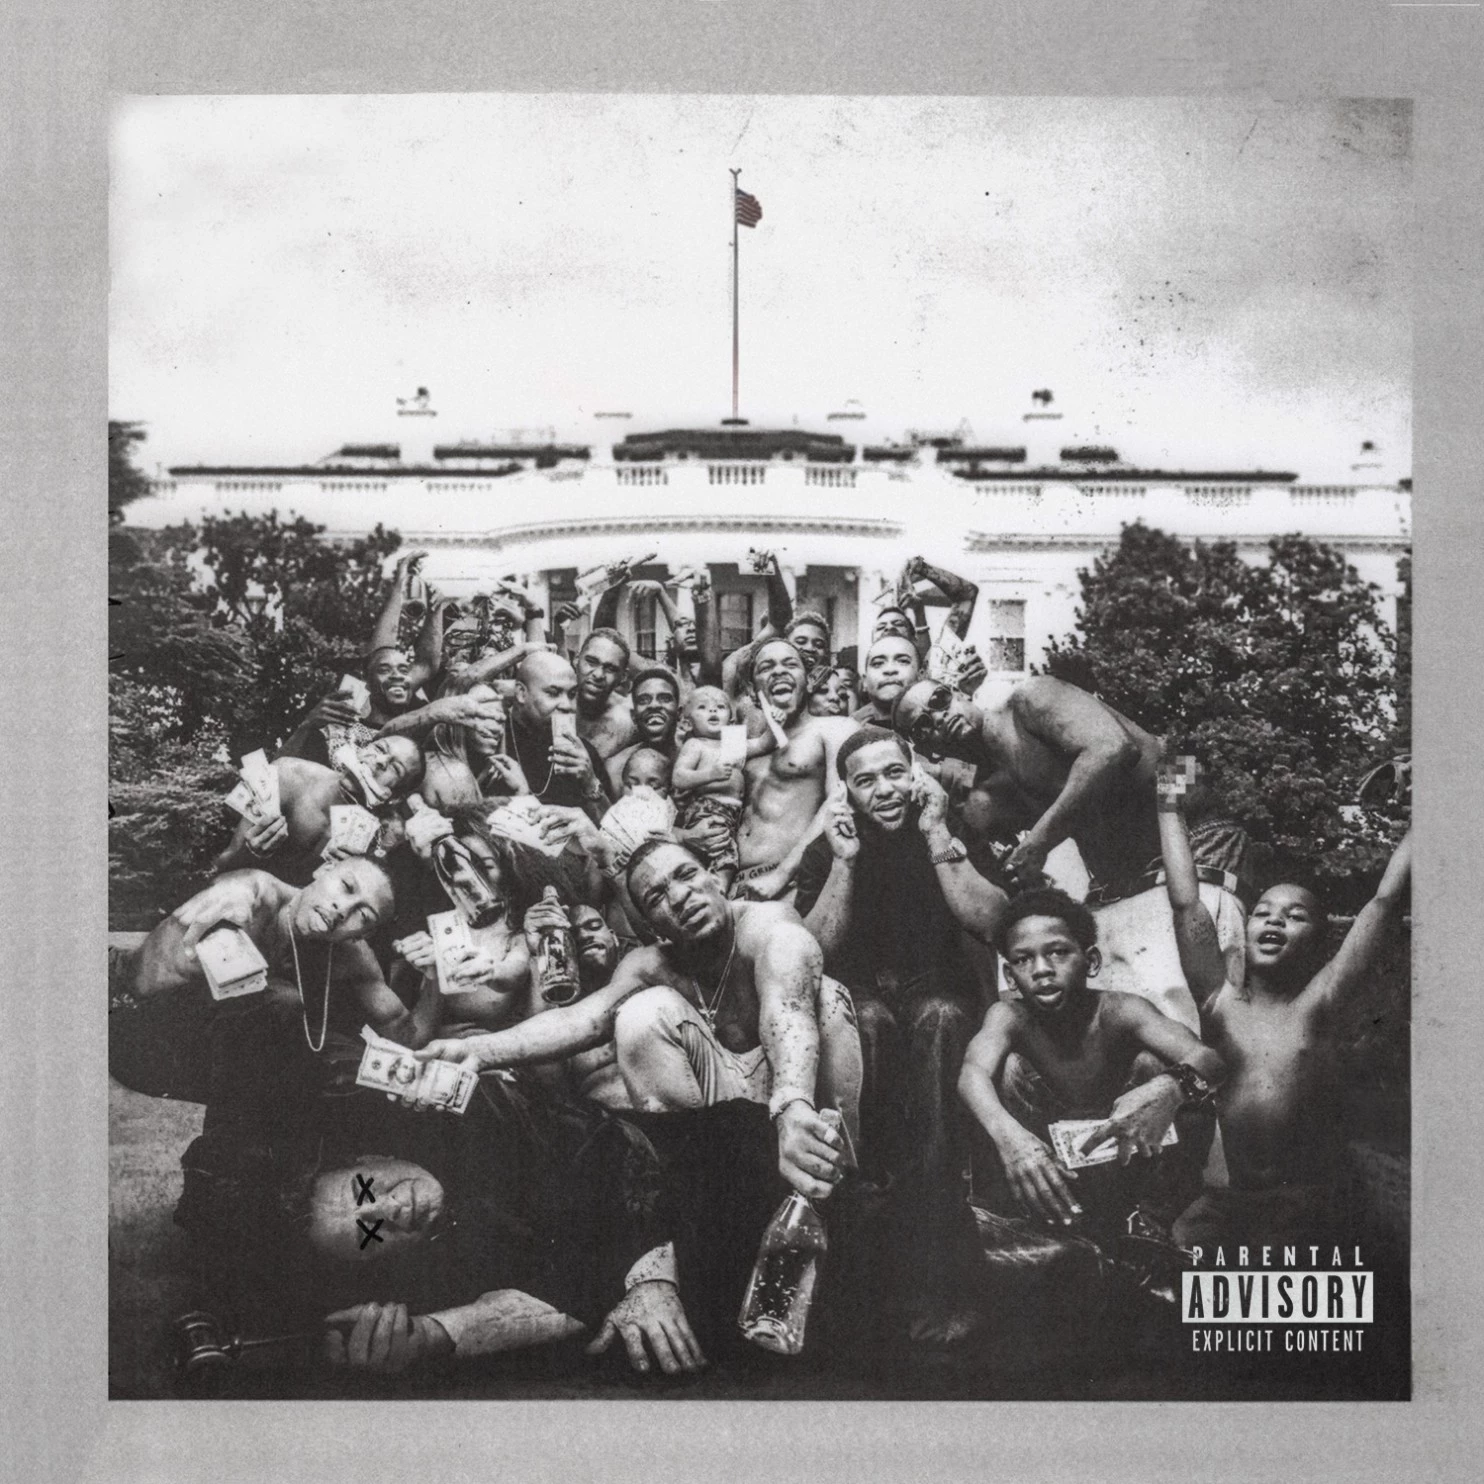 TPAB_02.16.15_1142 2_nowords